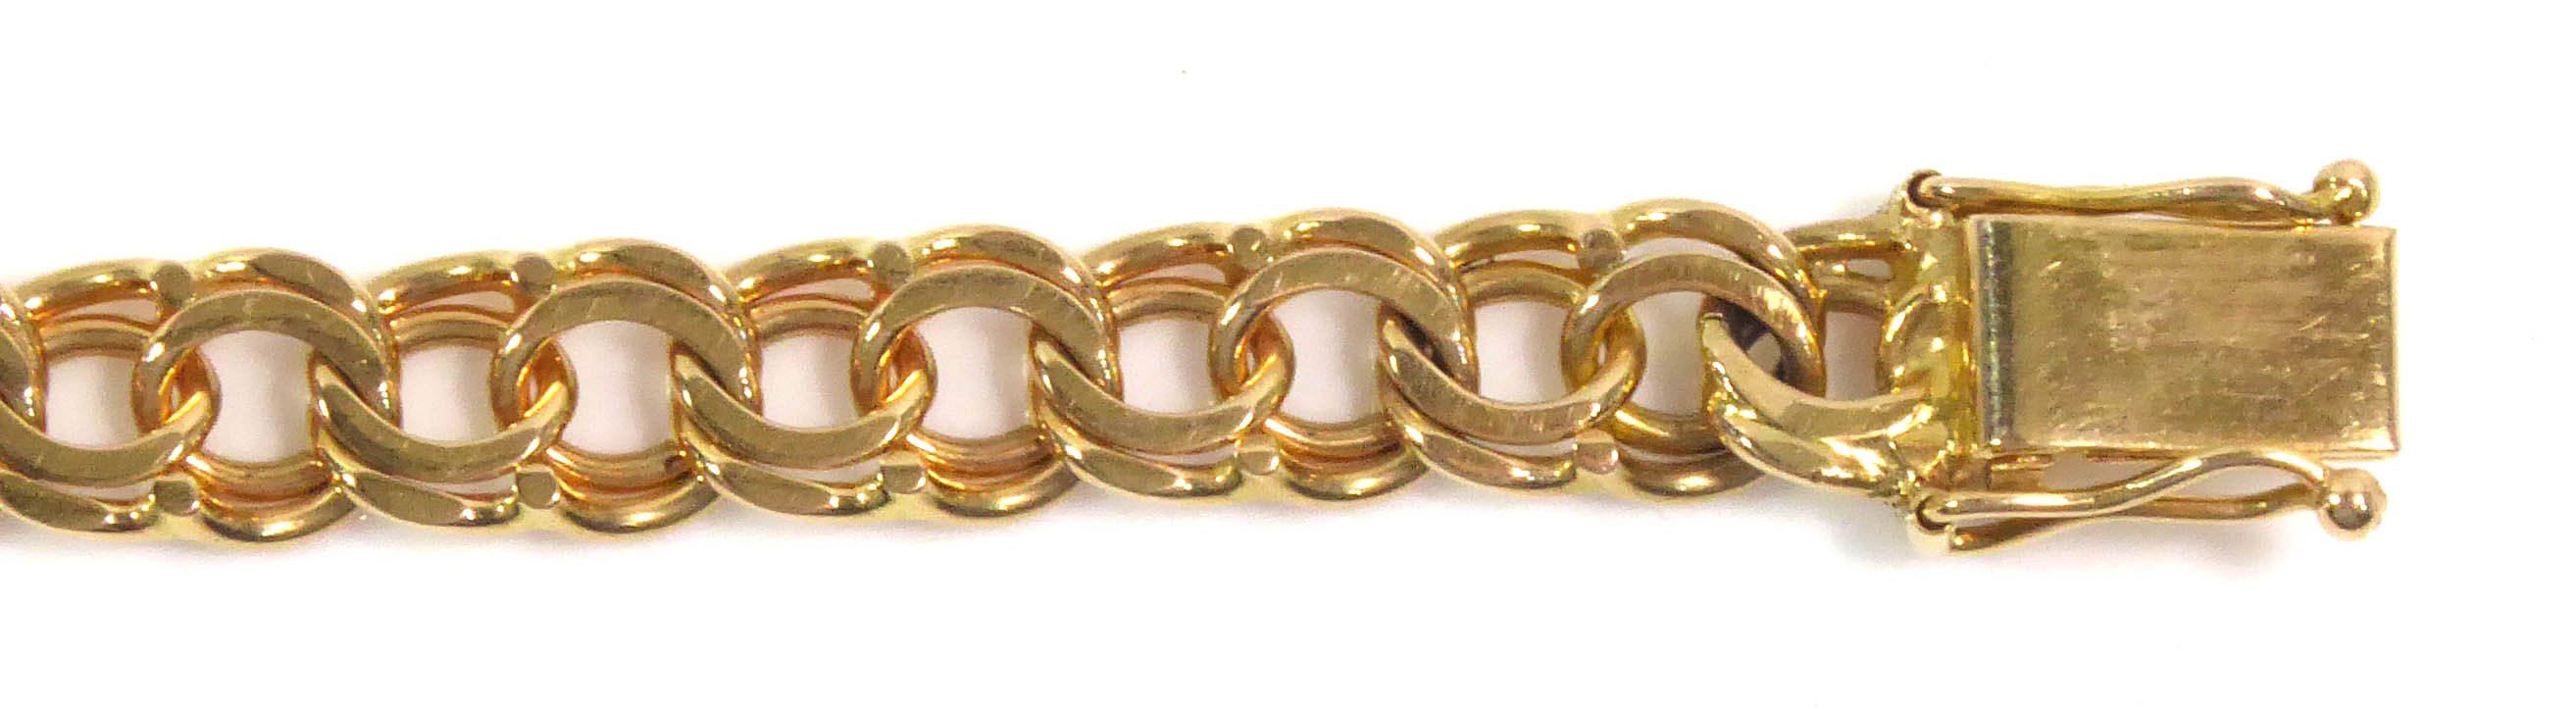 A SWEDISH 18CT GOLD BRACELET Having geometric form links, marked? J and A, Sweden?. (approx 18cm) - Image 2 of 2